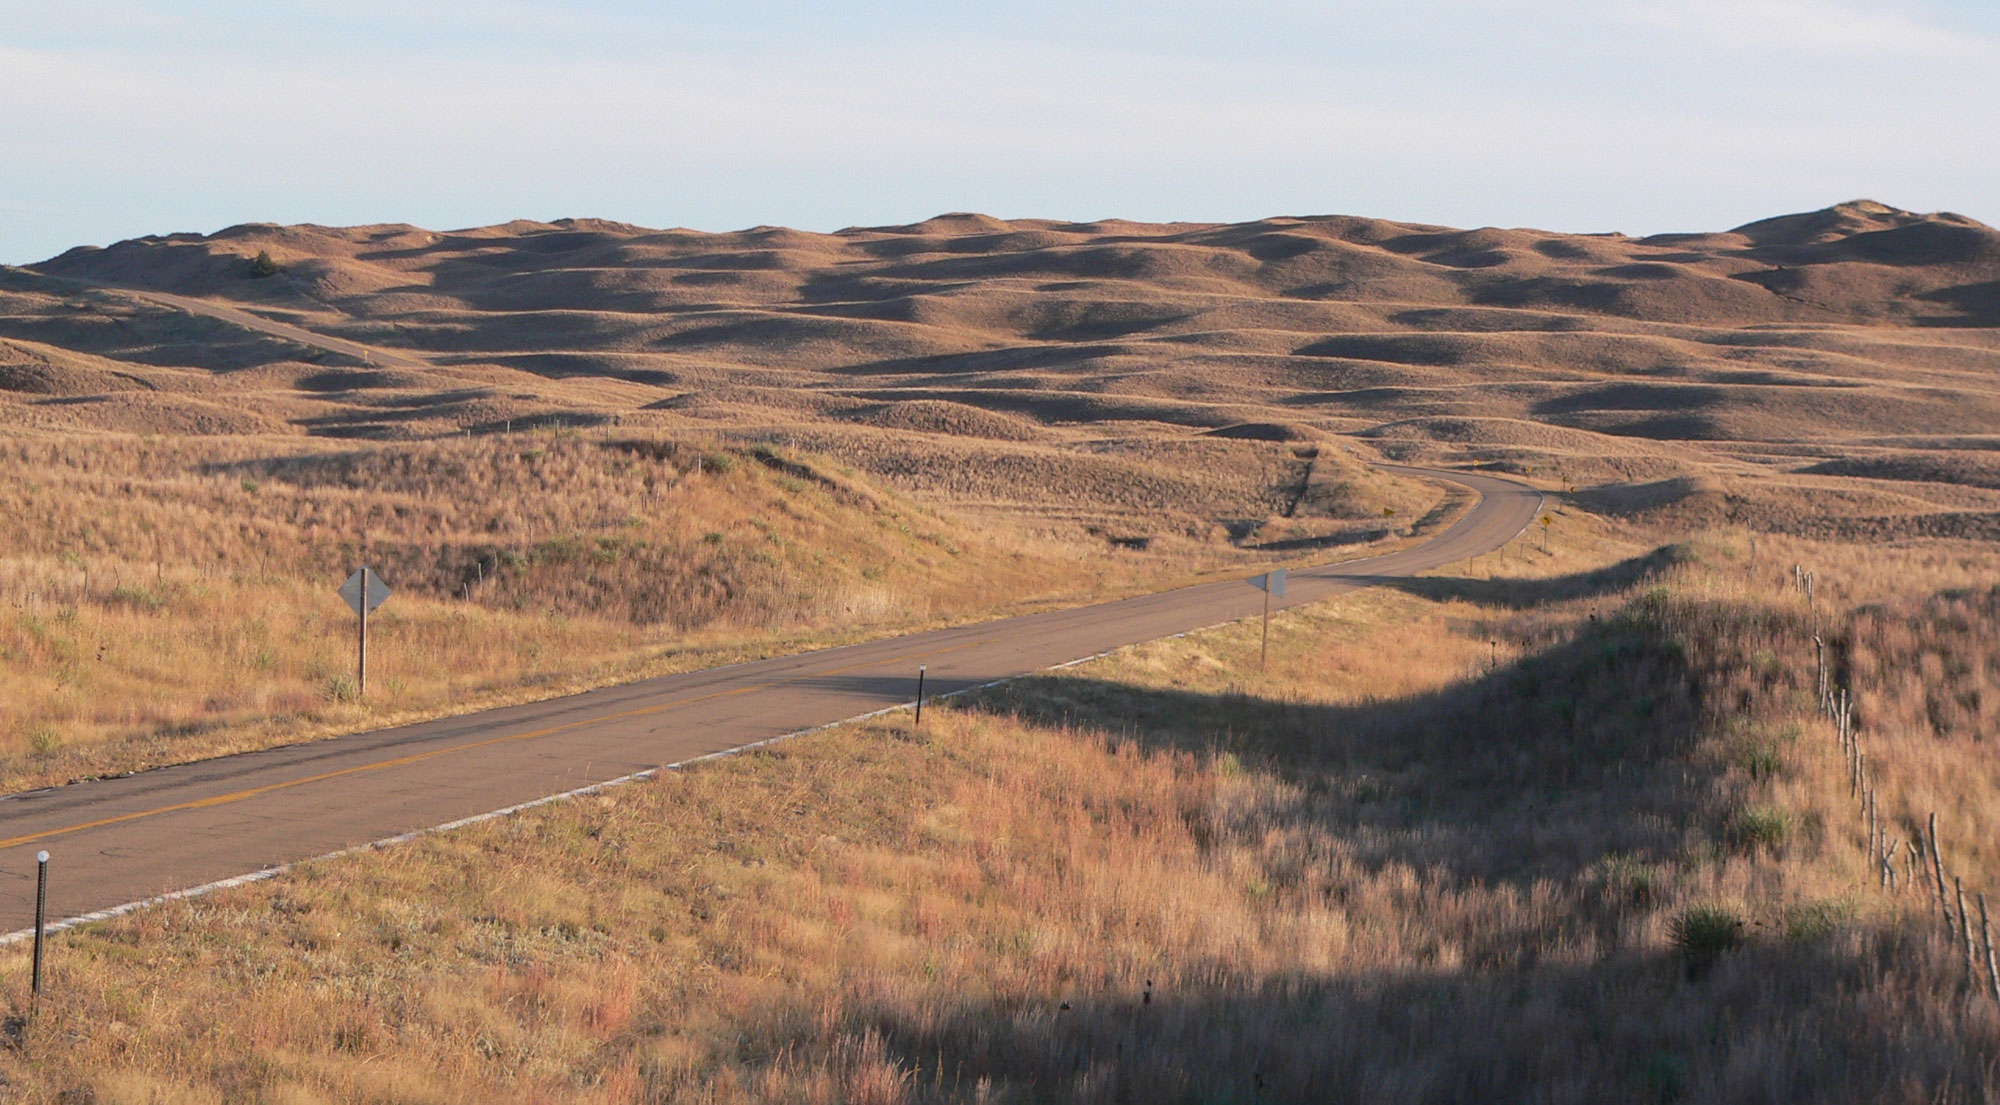 Photo of the Nebraska Sandhills. The photo shows low, rolling hills covered by dry yellow to brown grass.